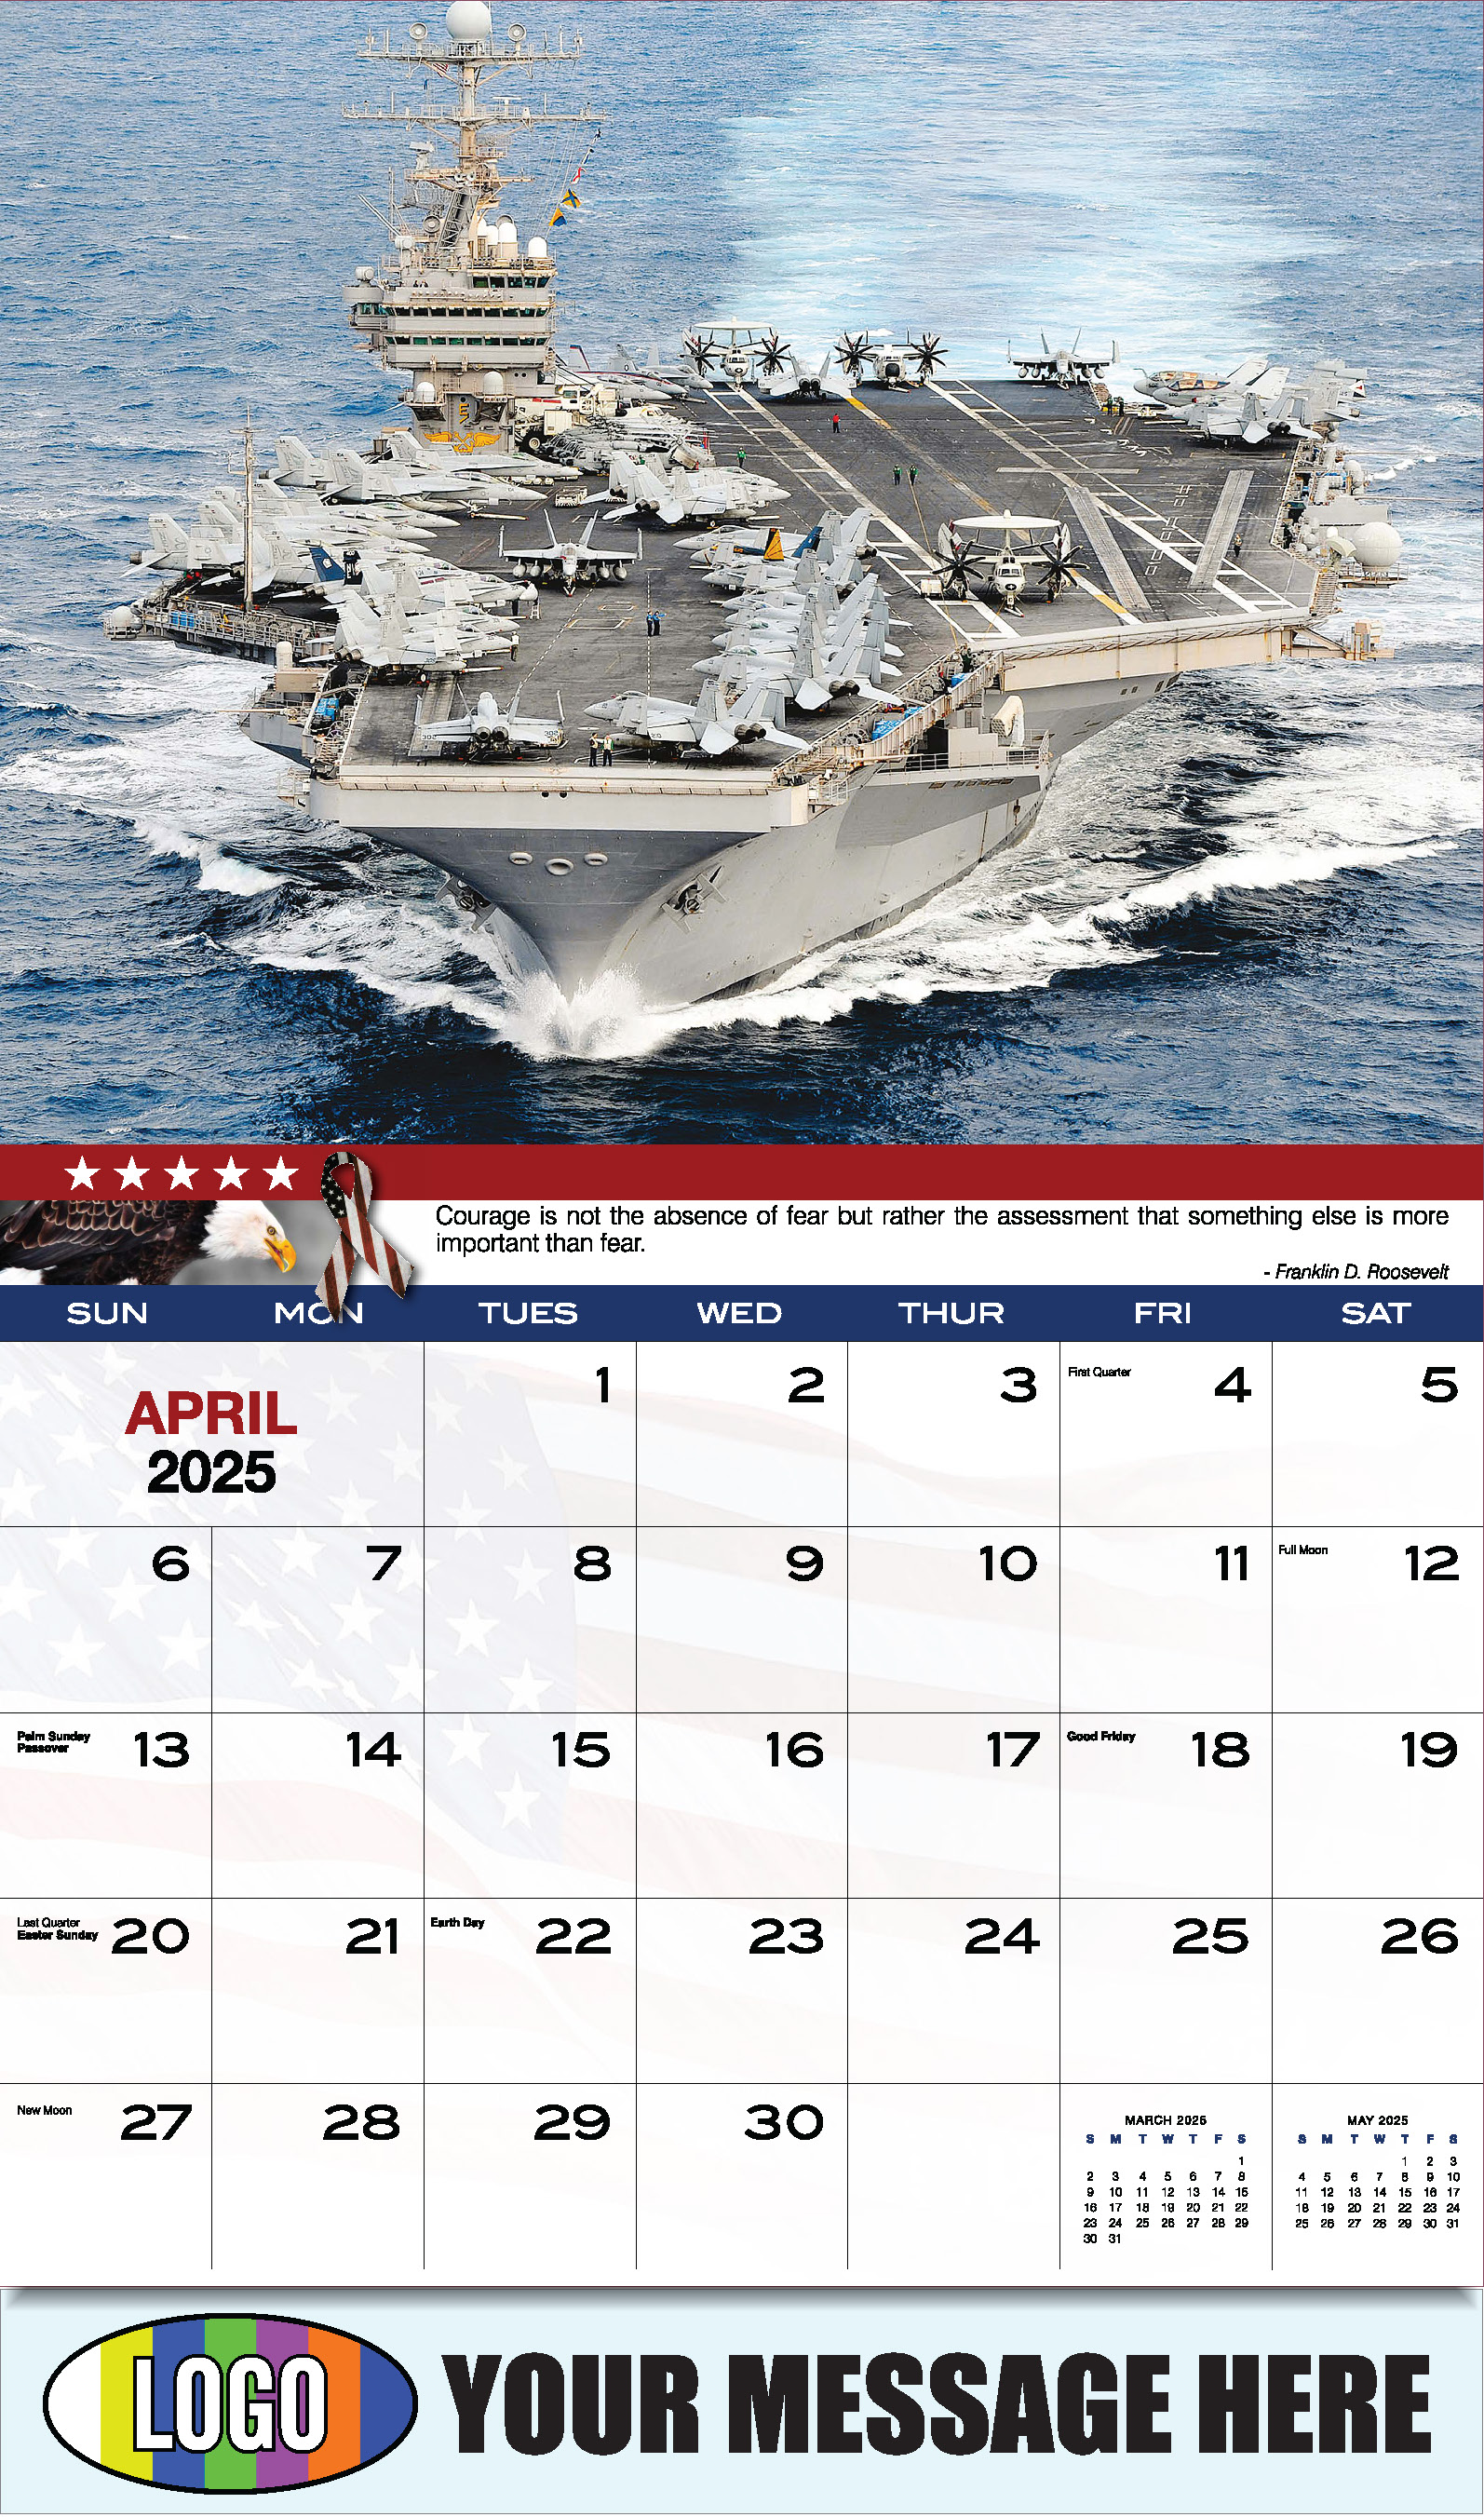 Home of the Brave 2025 USA Armed Forces Business Promo Calendar - April